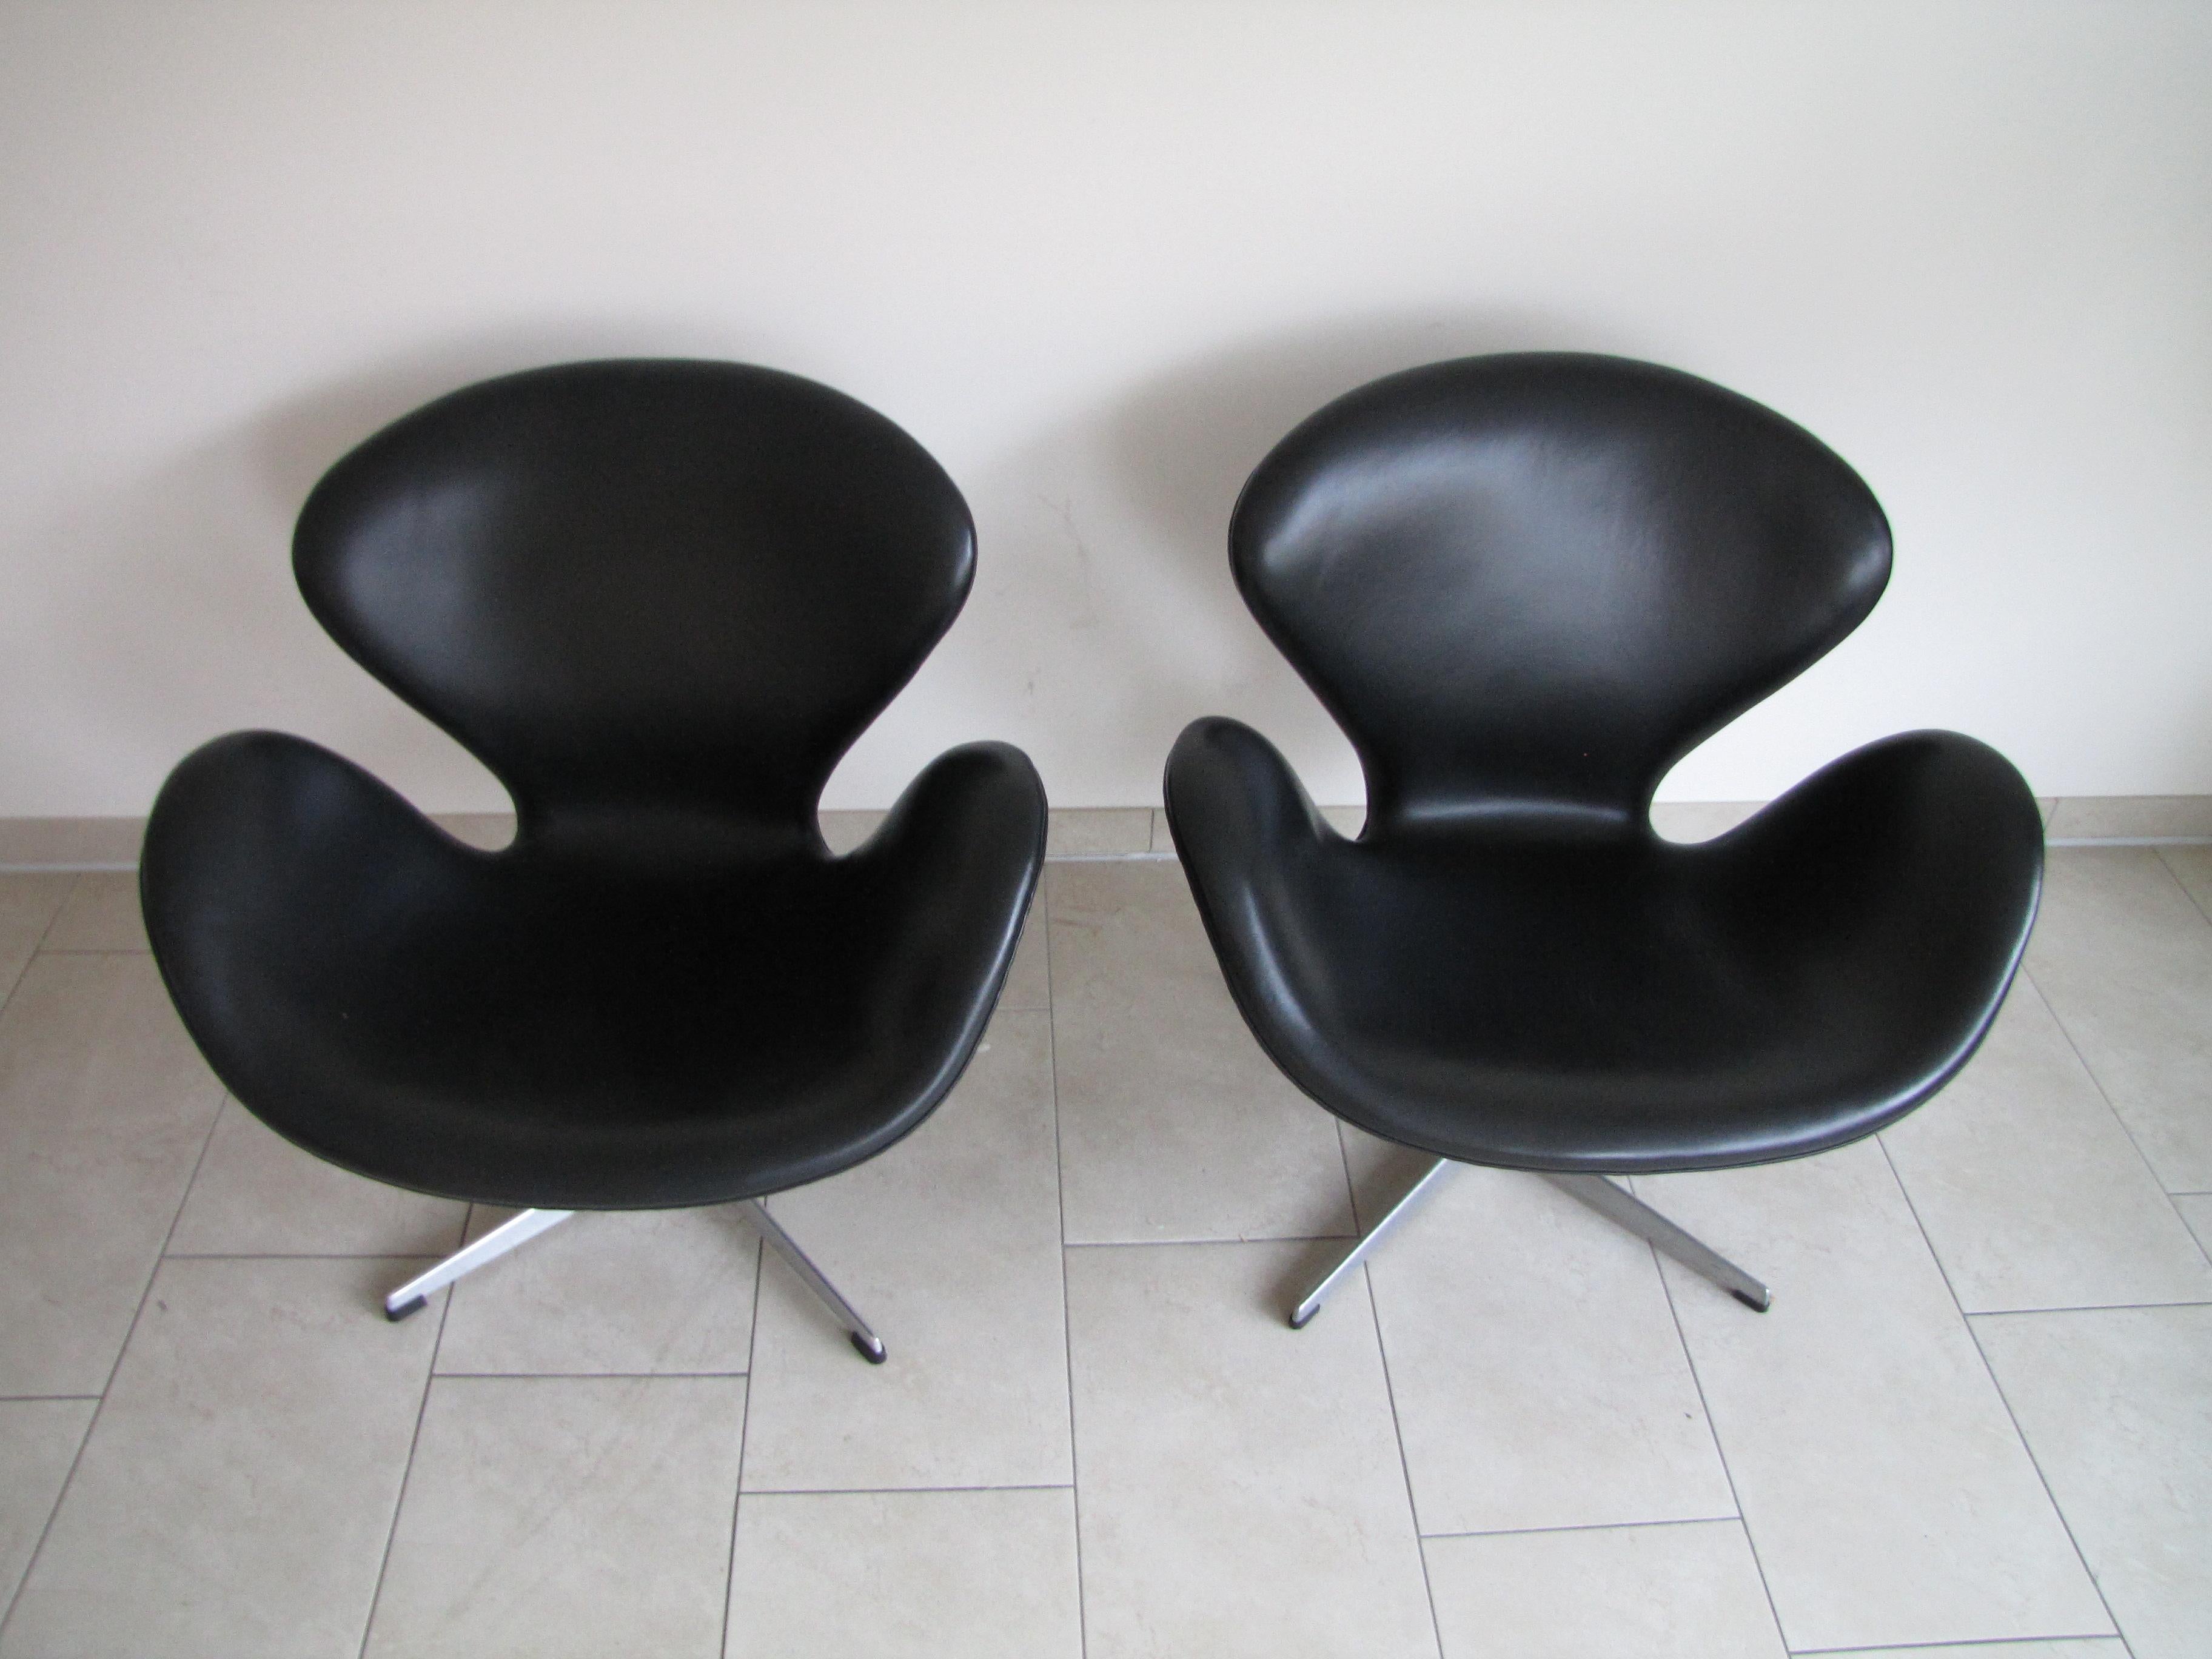 A set of two Swan chairs designed by Arne Jacobsen for Fritz Hansen in 1958.
upholstered in black leather
early production from the 1960s